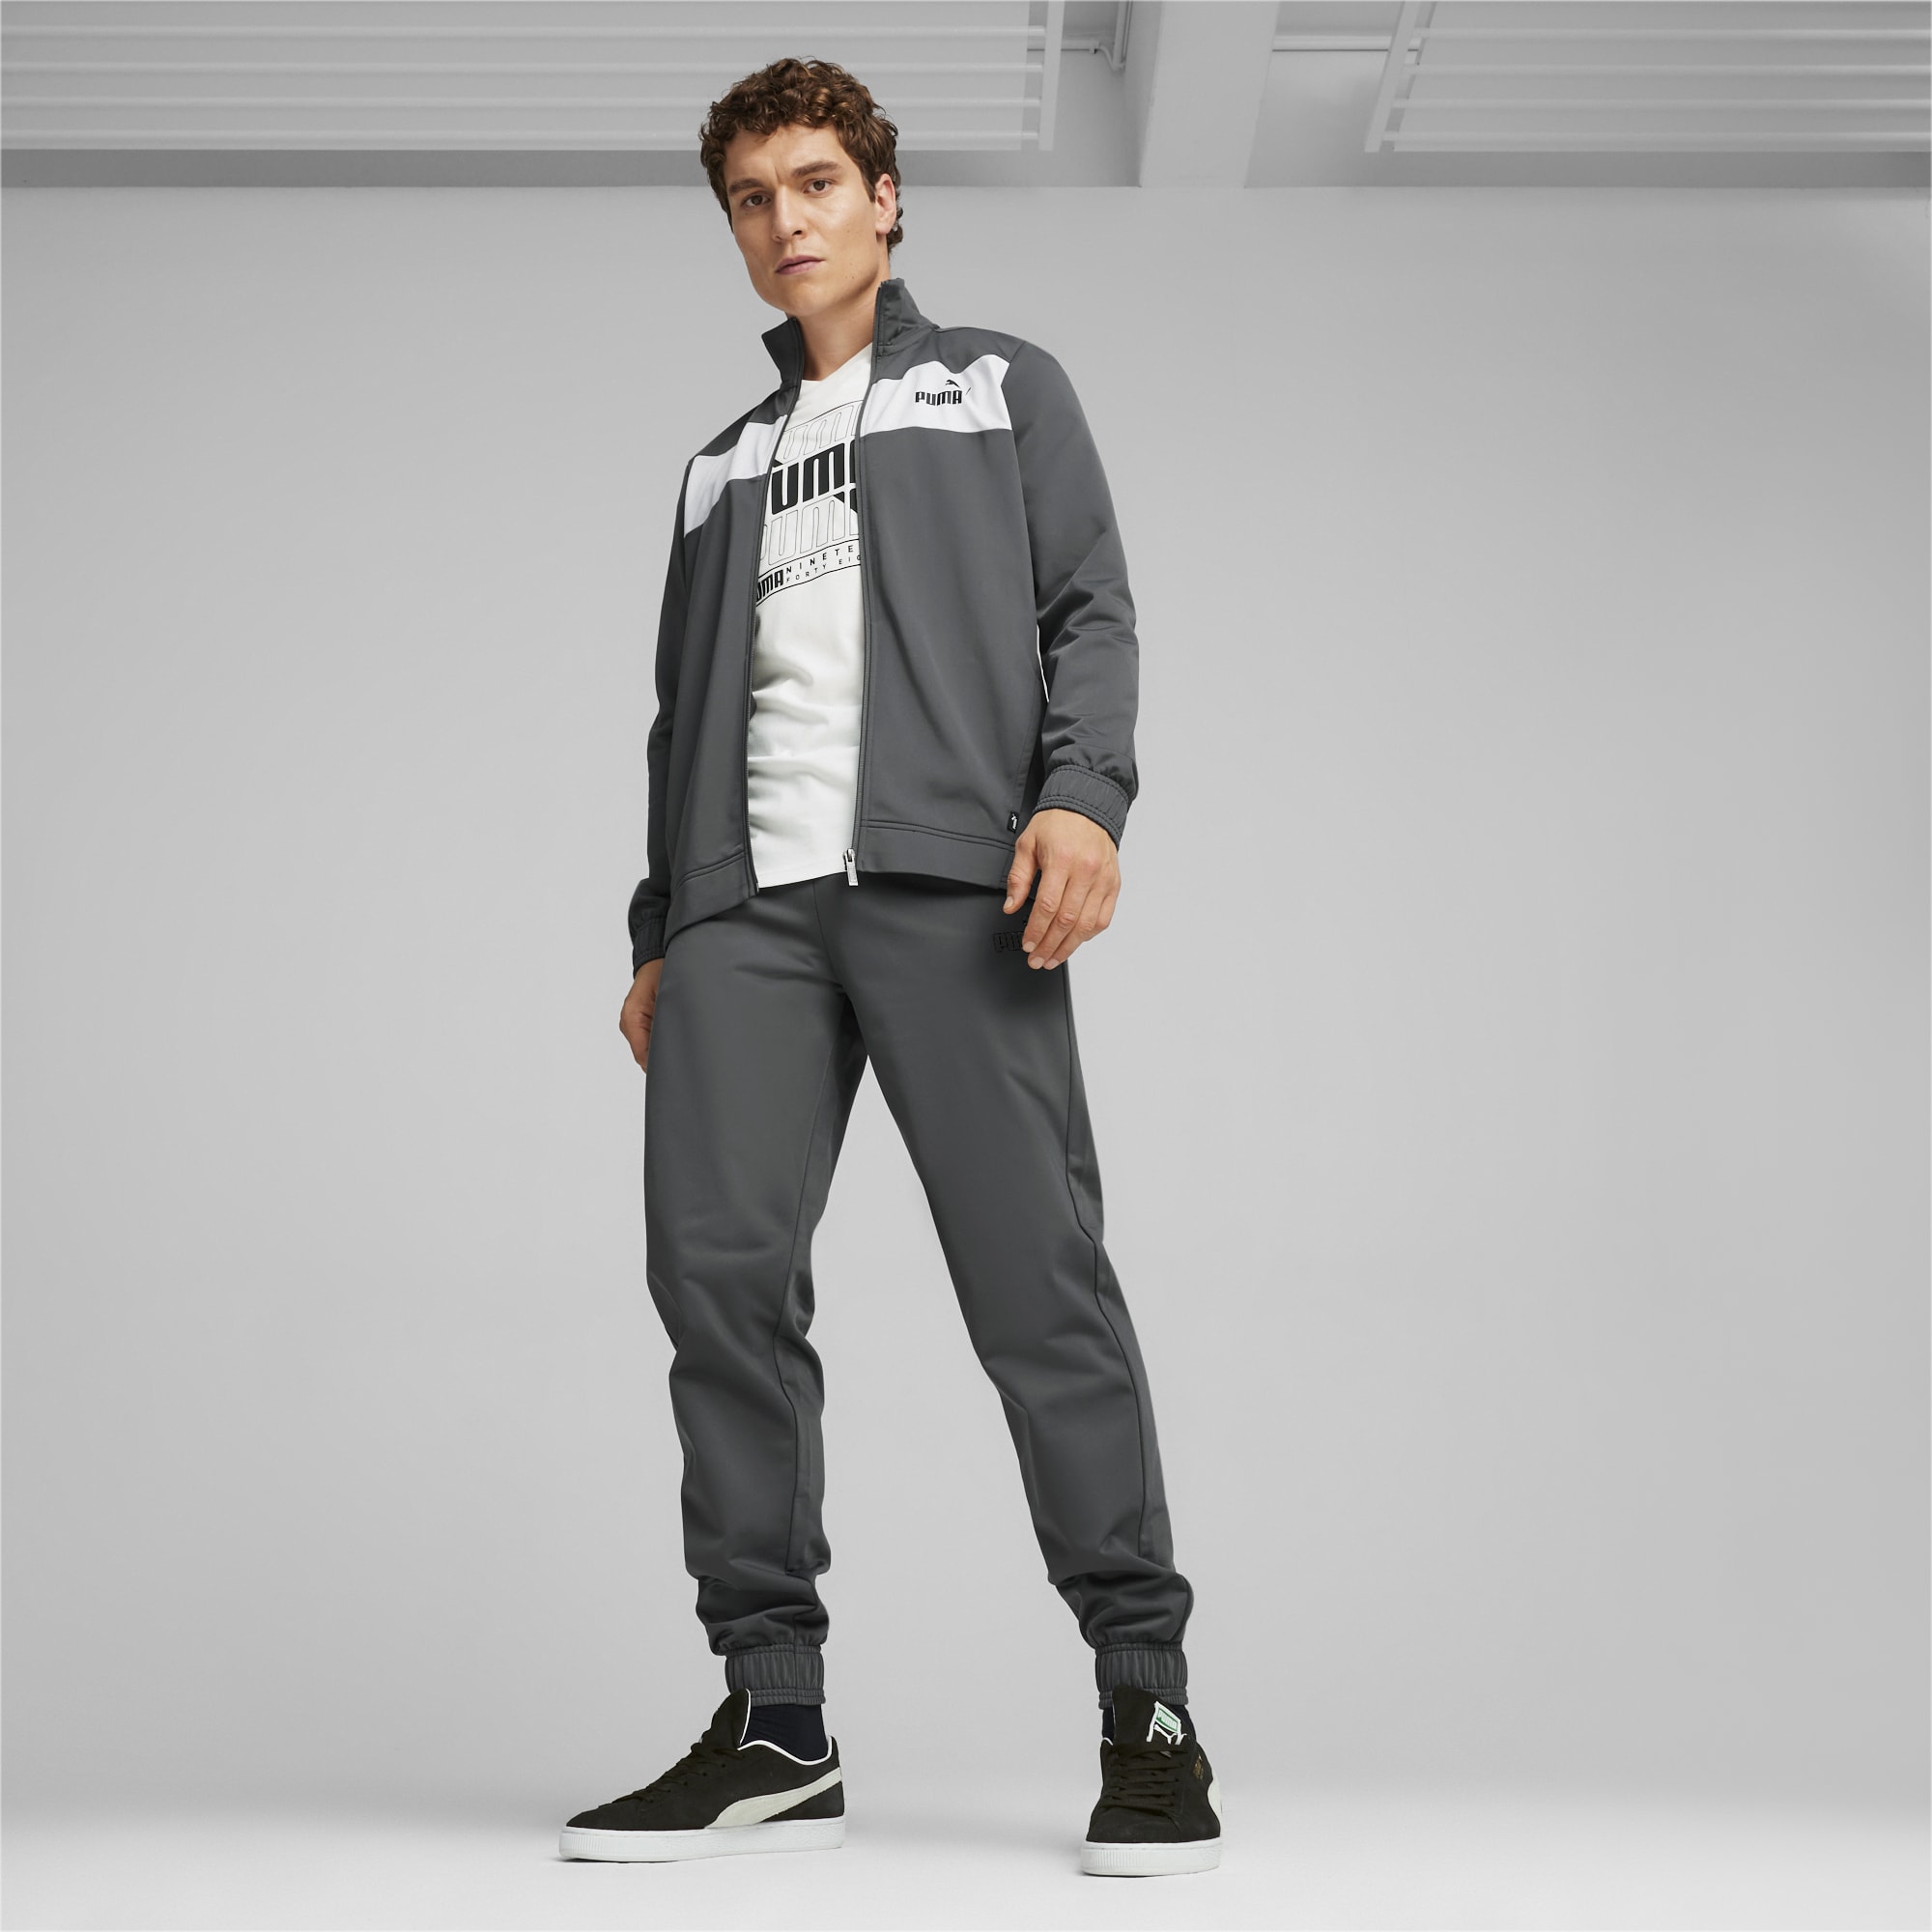 PUMA Men's Poly Tracksuit, Mineral Grey, Size 4XL, Clothing